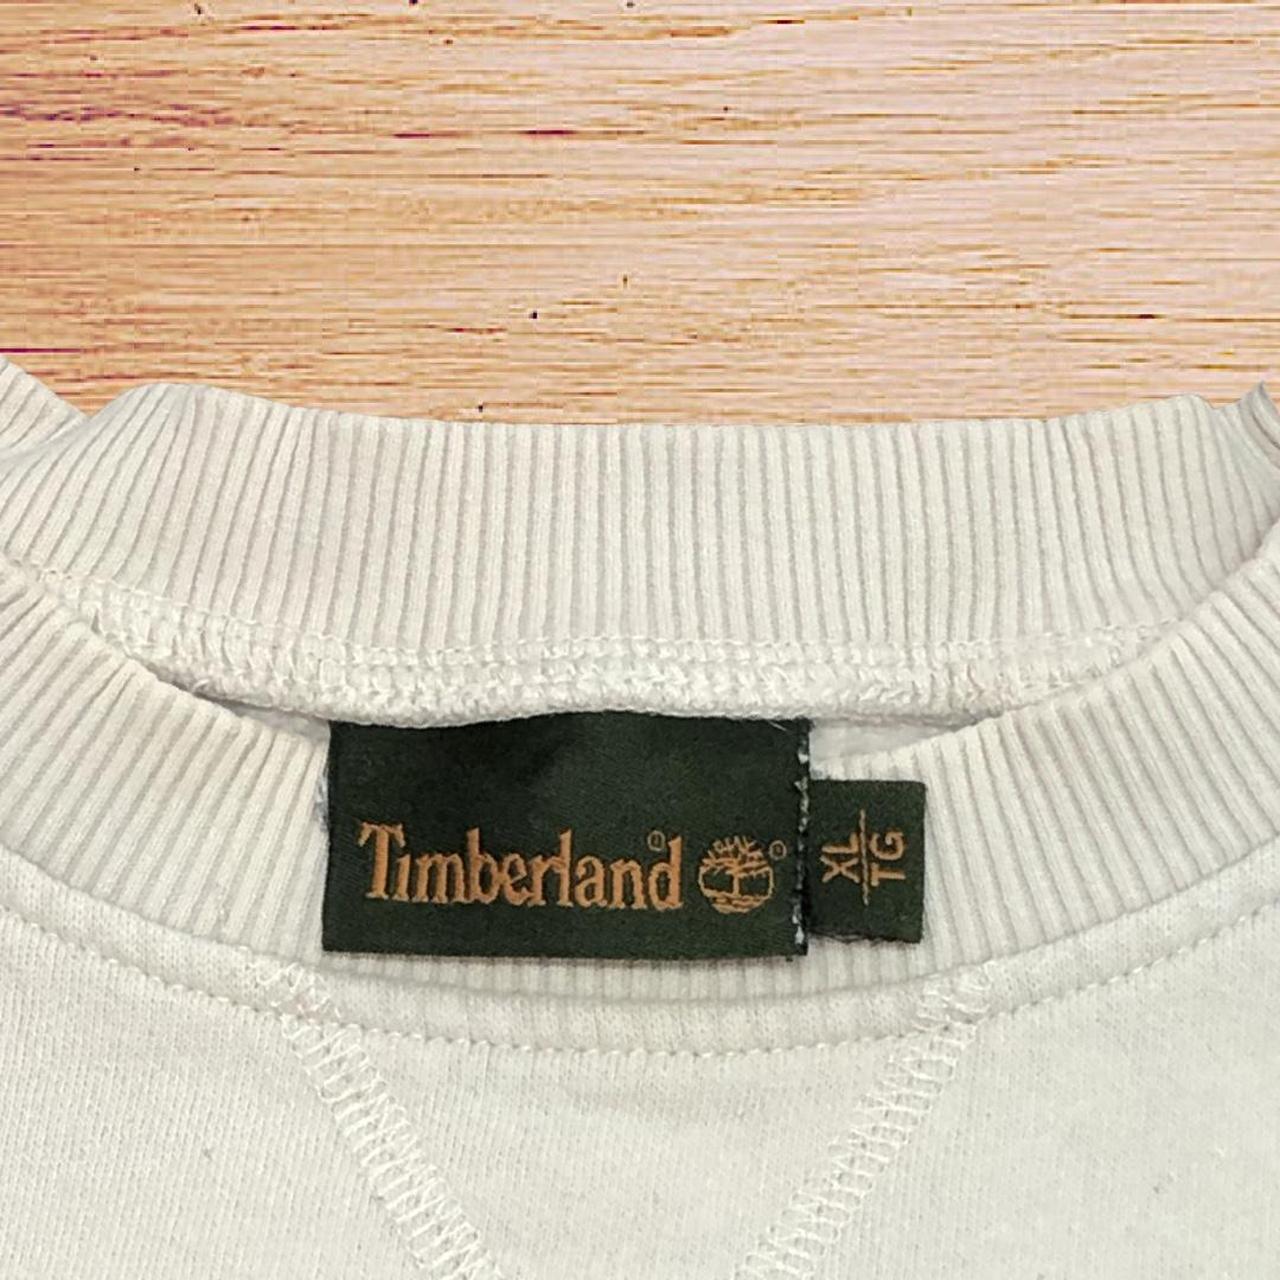 Product Image 3 - Timberland crewneck!

Measurements:
Length- 29”
Width (Pit to